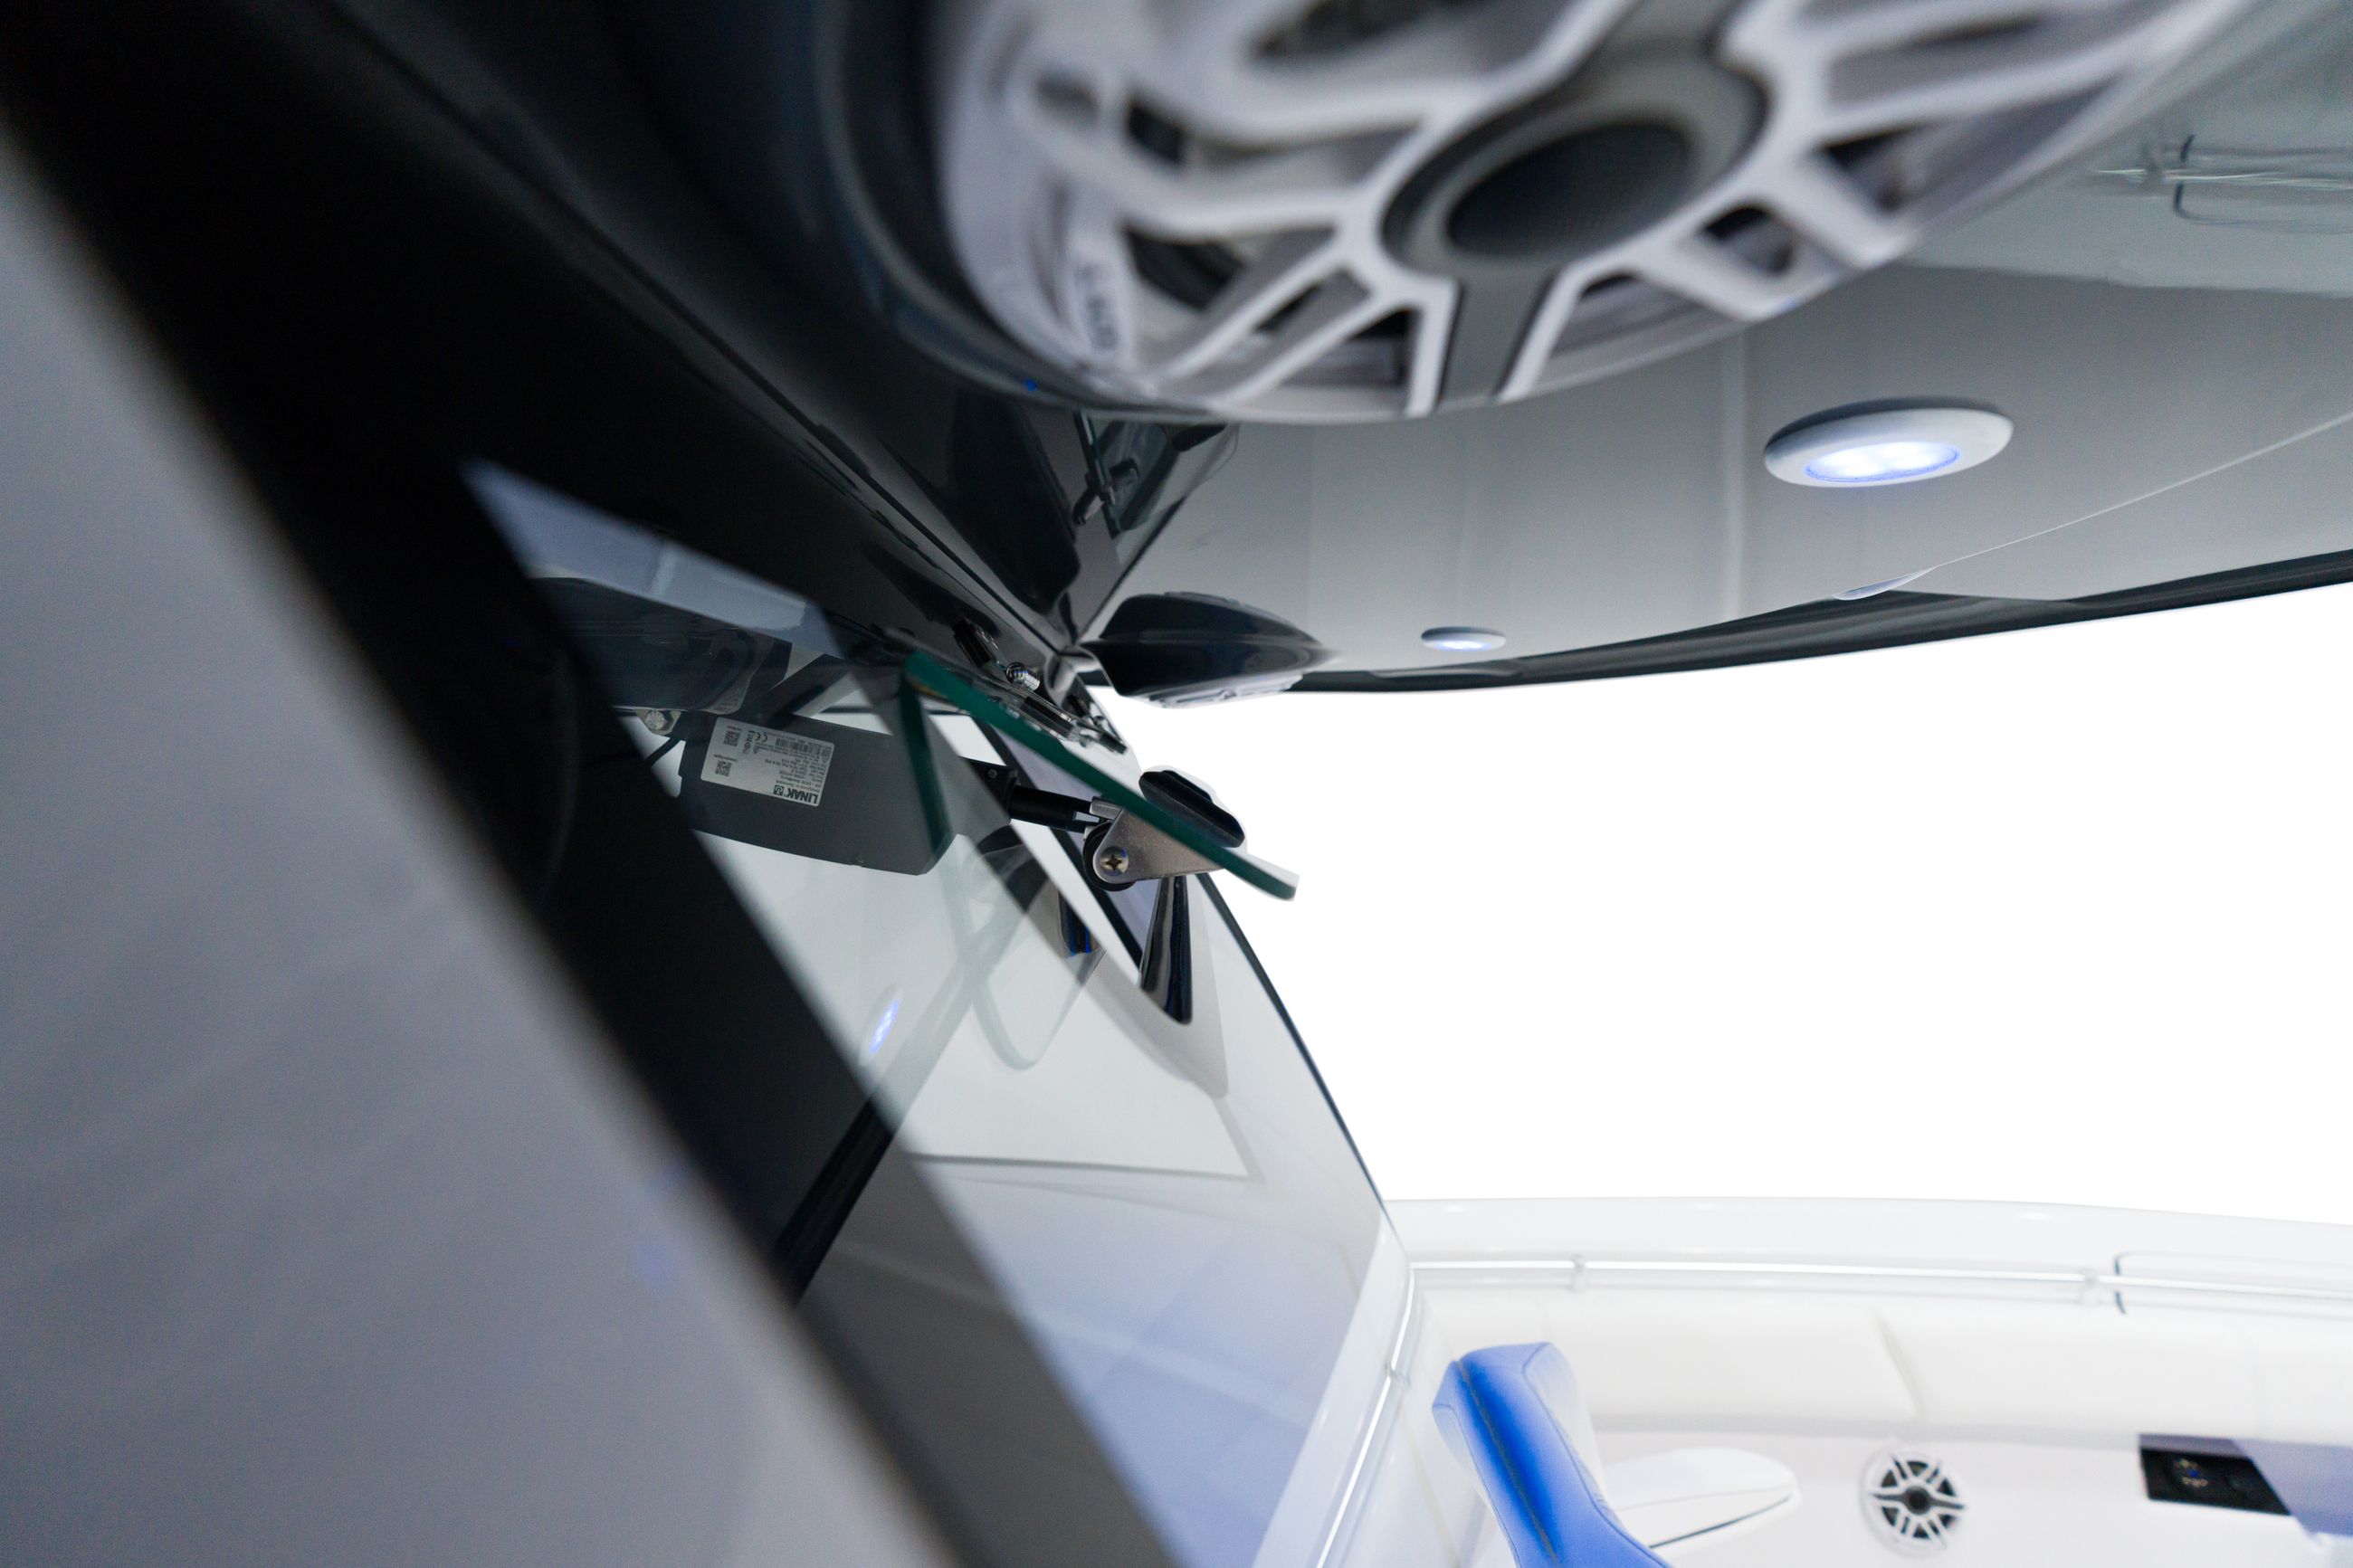 Detail image of Integrated Tempered Glass Windshield w/ Actuated Vent